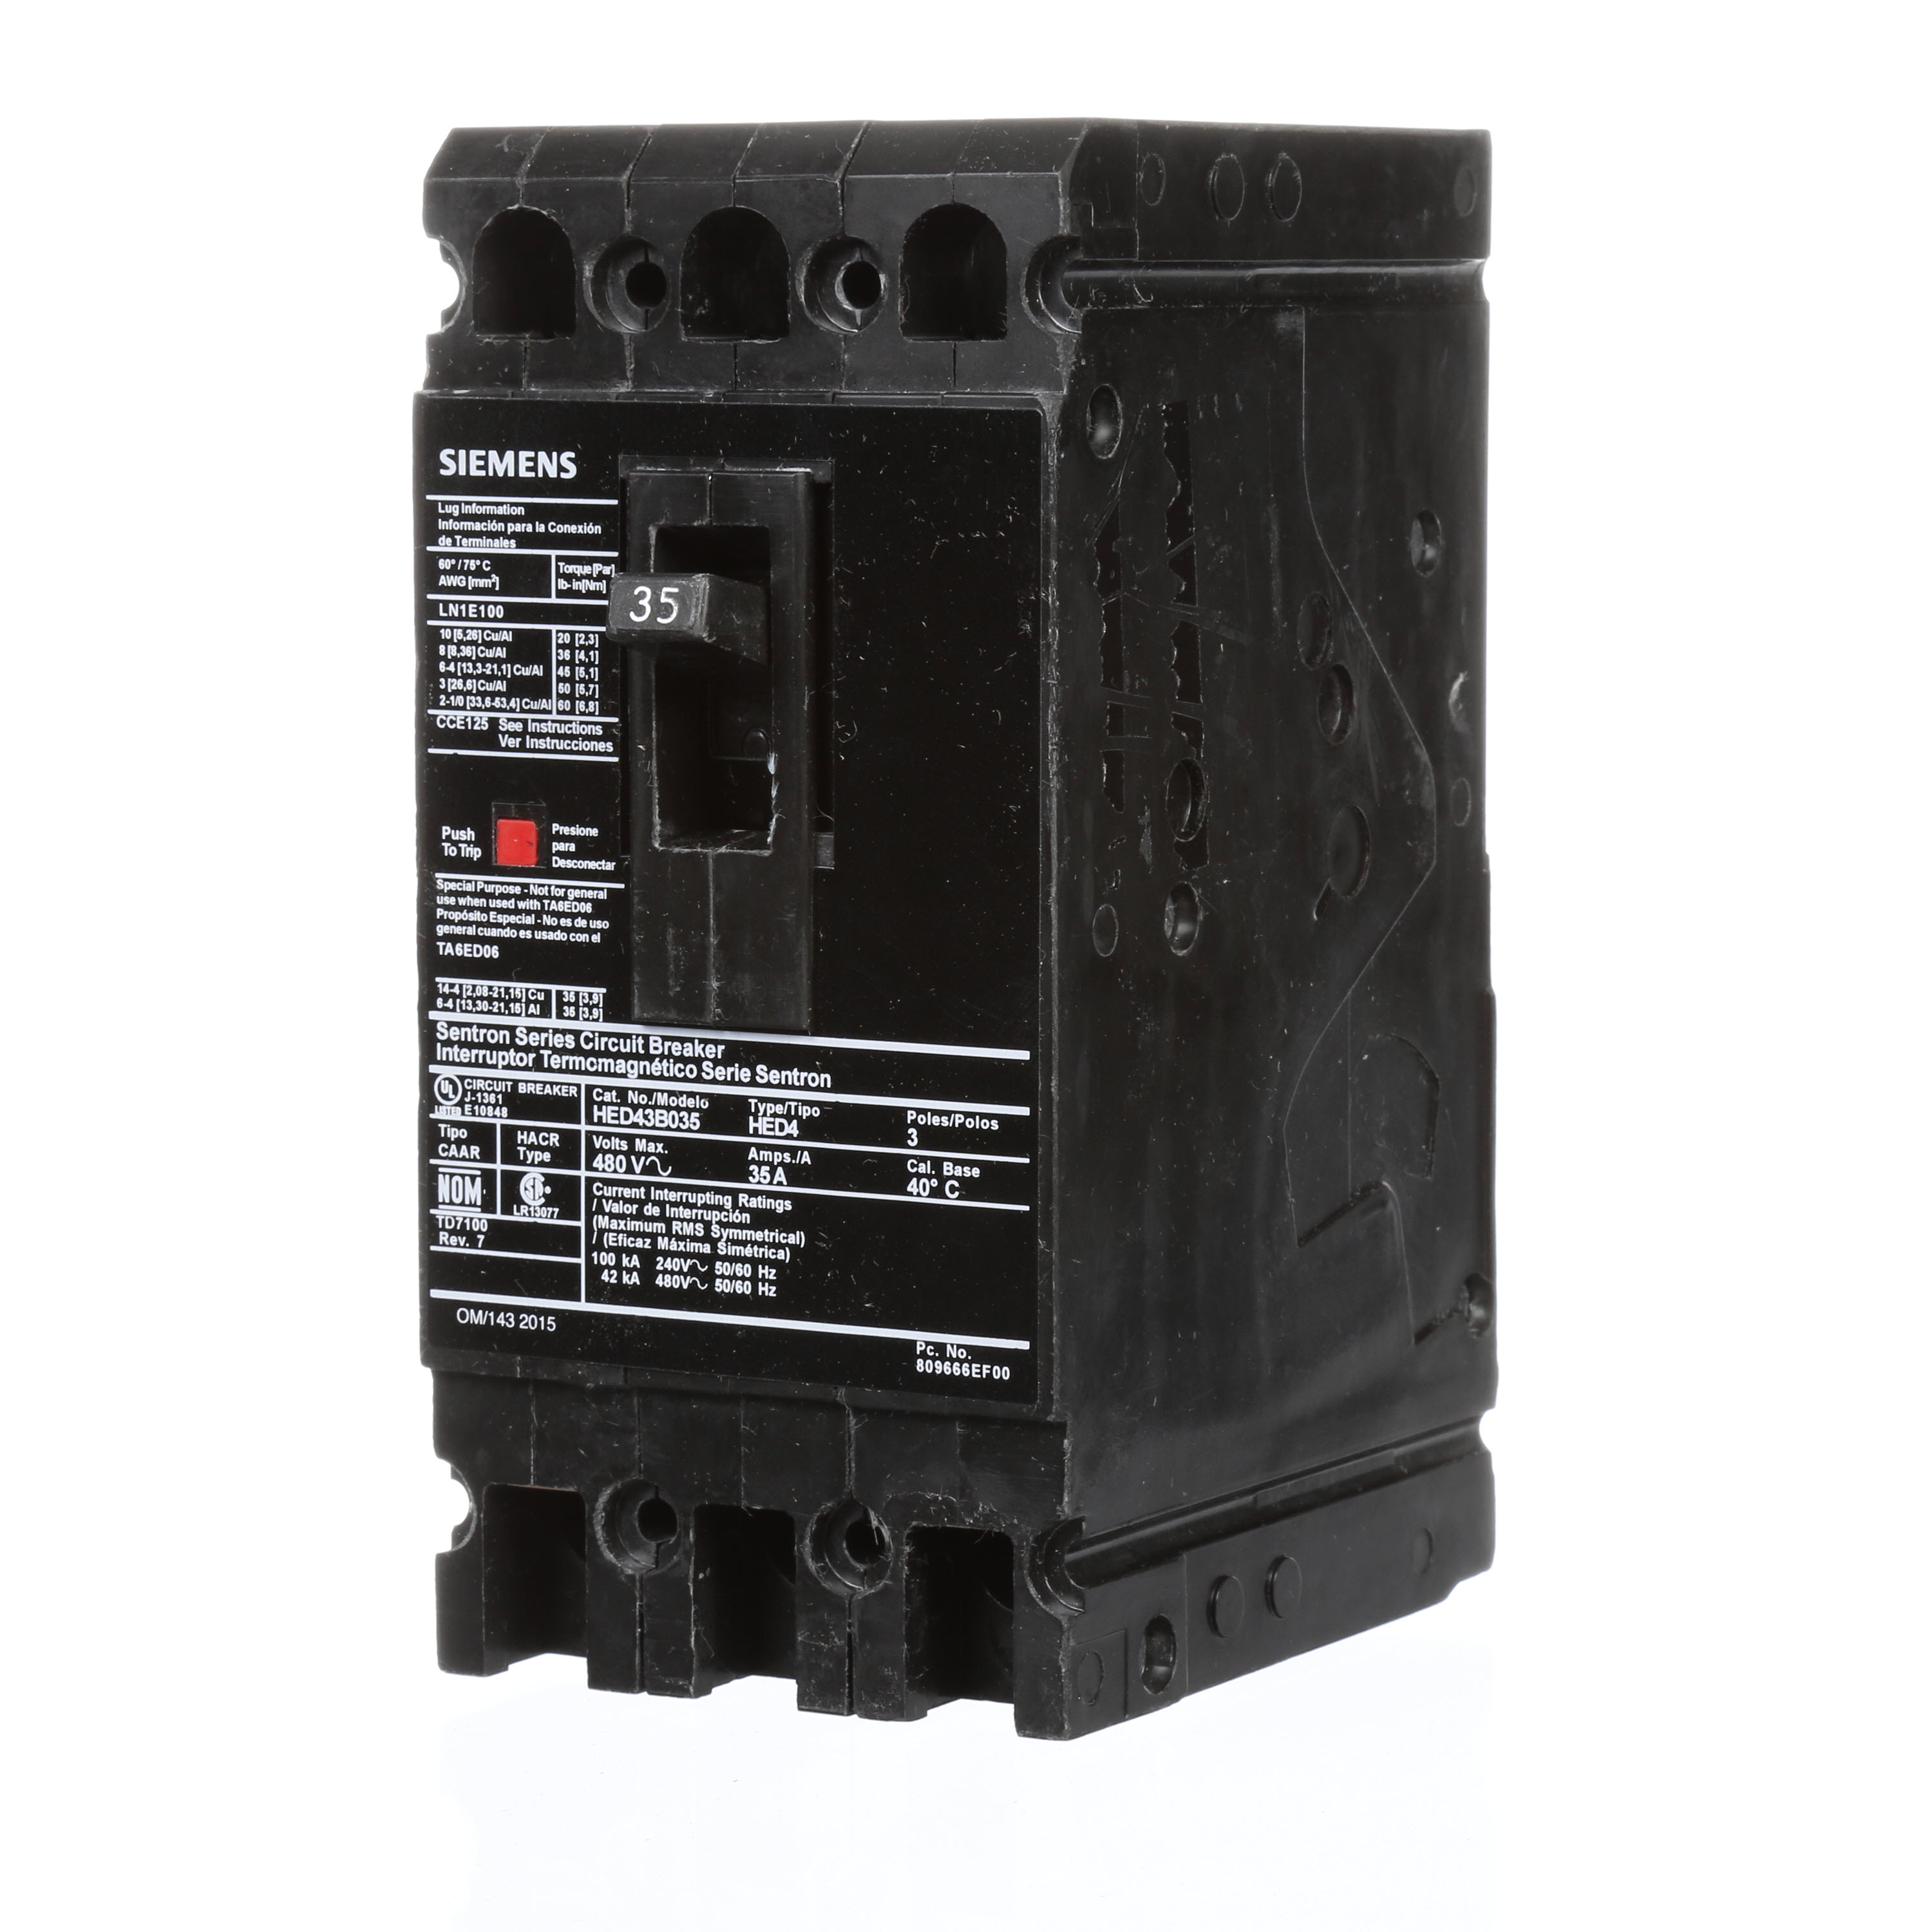 SIEMENS LOW VOLTAGE SENTRON MOLDED CASE CIRCUIT BREAKER WITH THERMAL - MAGNETICTRIP UNIT. STANDARD 40 DEG C BREAKER ED FRAME WITH HIGH BREAKING CAPACITY. 35A 3-POLE (42KAIC AT 480V). NON-INTERCHANGEABLE TRIP UNIT. SPECIAL FEATURES LOAD LUGS ONLY (LN1E100) WIRE RANGE 10 - 1/0AWG (CU/AL). DIMENSIONS (W x H x D) IN 3.00x 6.4 x 3.92.